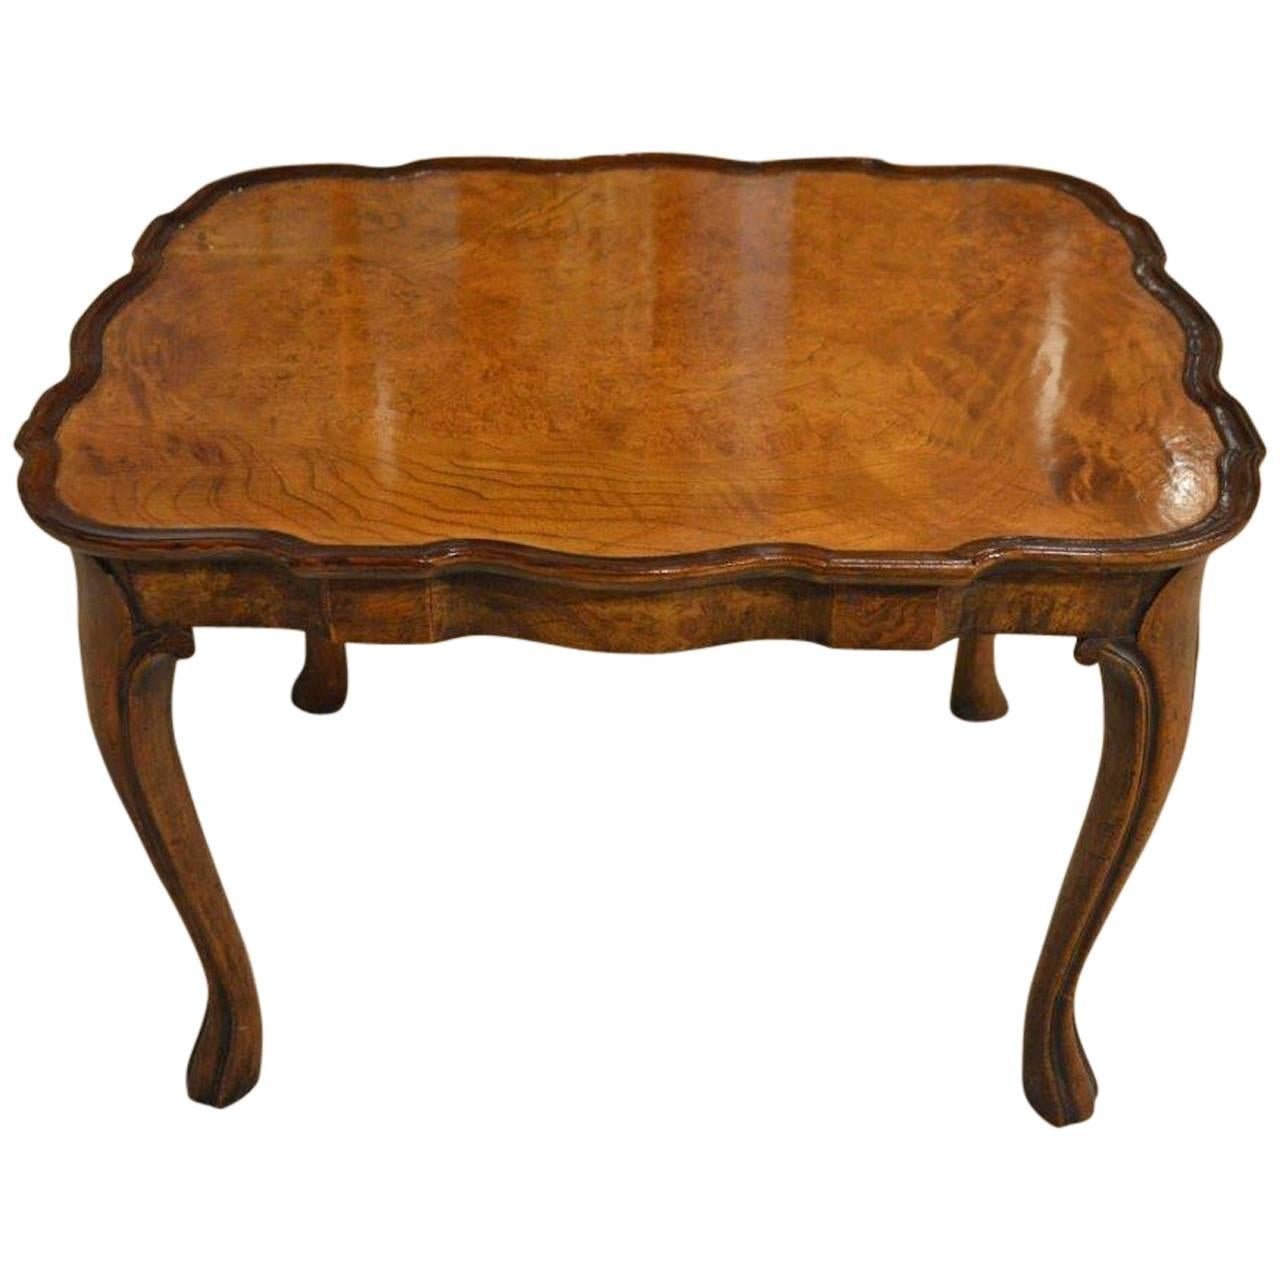 Small Burr Walnut, 1920s, Period Antique Coffee Table